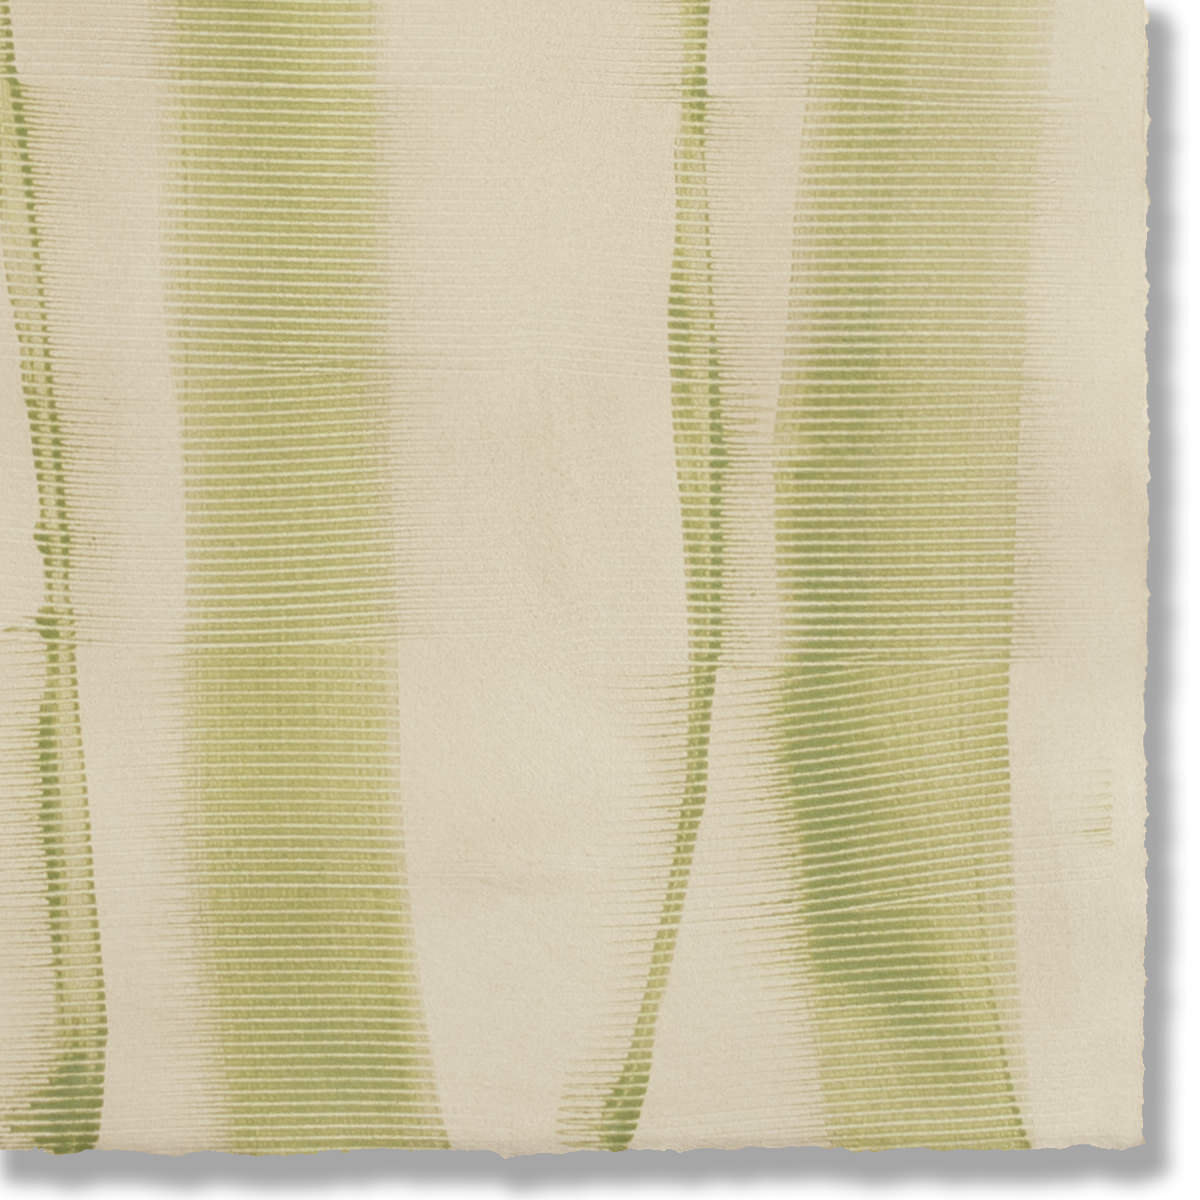 Detail of a handmade wallpaper swatch with an irregular combed stripe pattern in olive on a cream field.